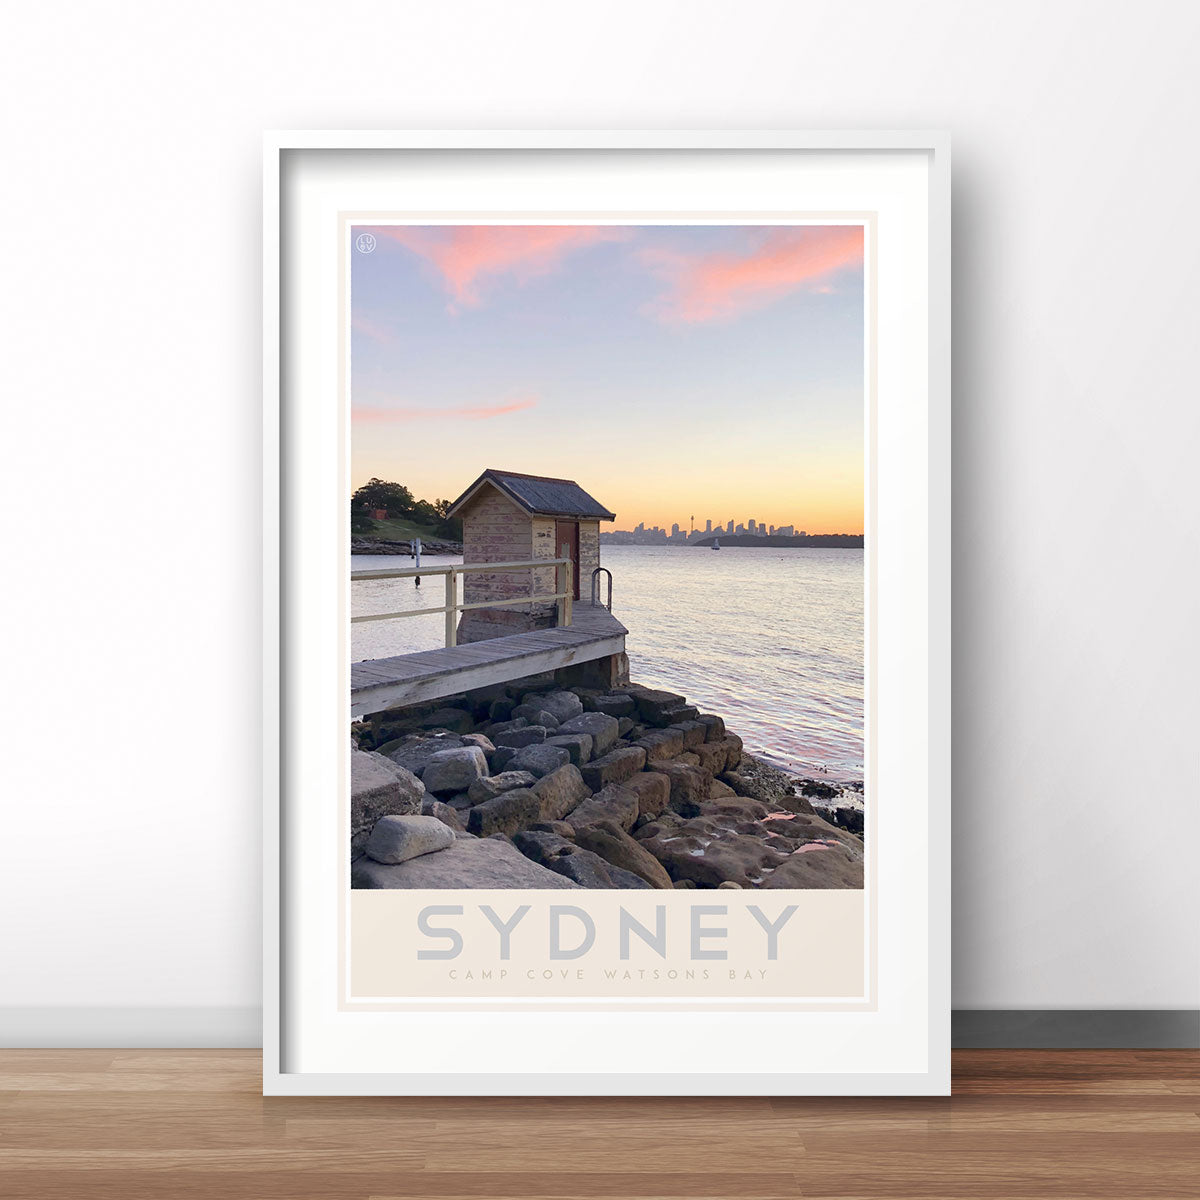 Sydney vintage travel style print by places we luv 